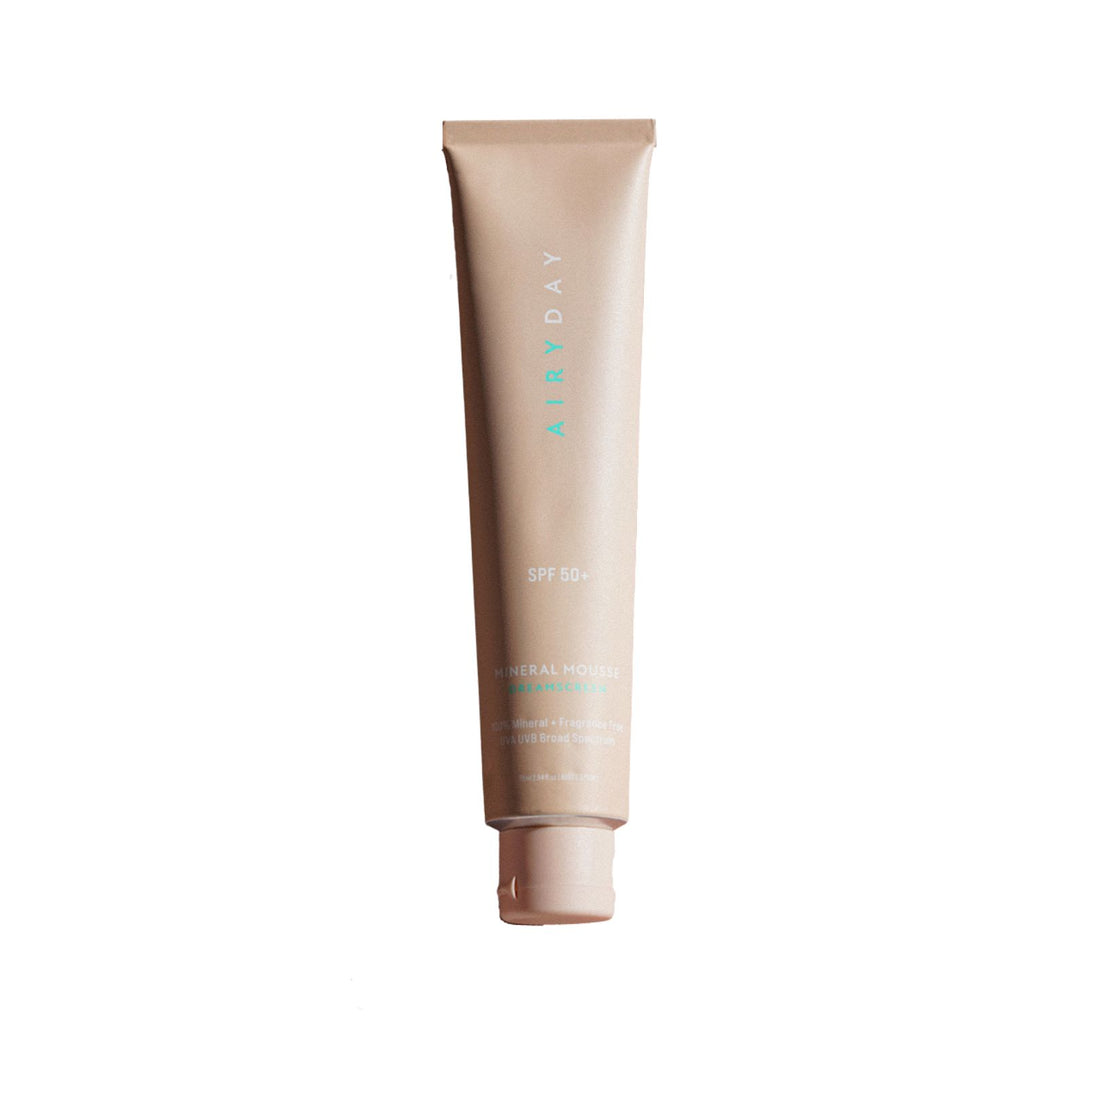 Airyday Mineral Mousse SPF50+ Dreamscreen